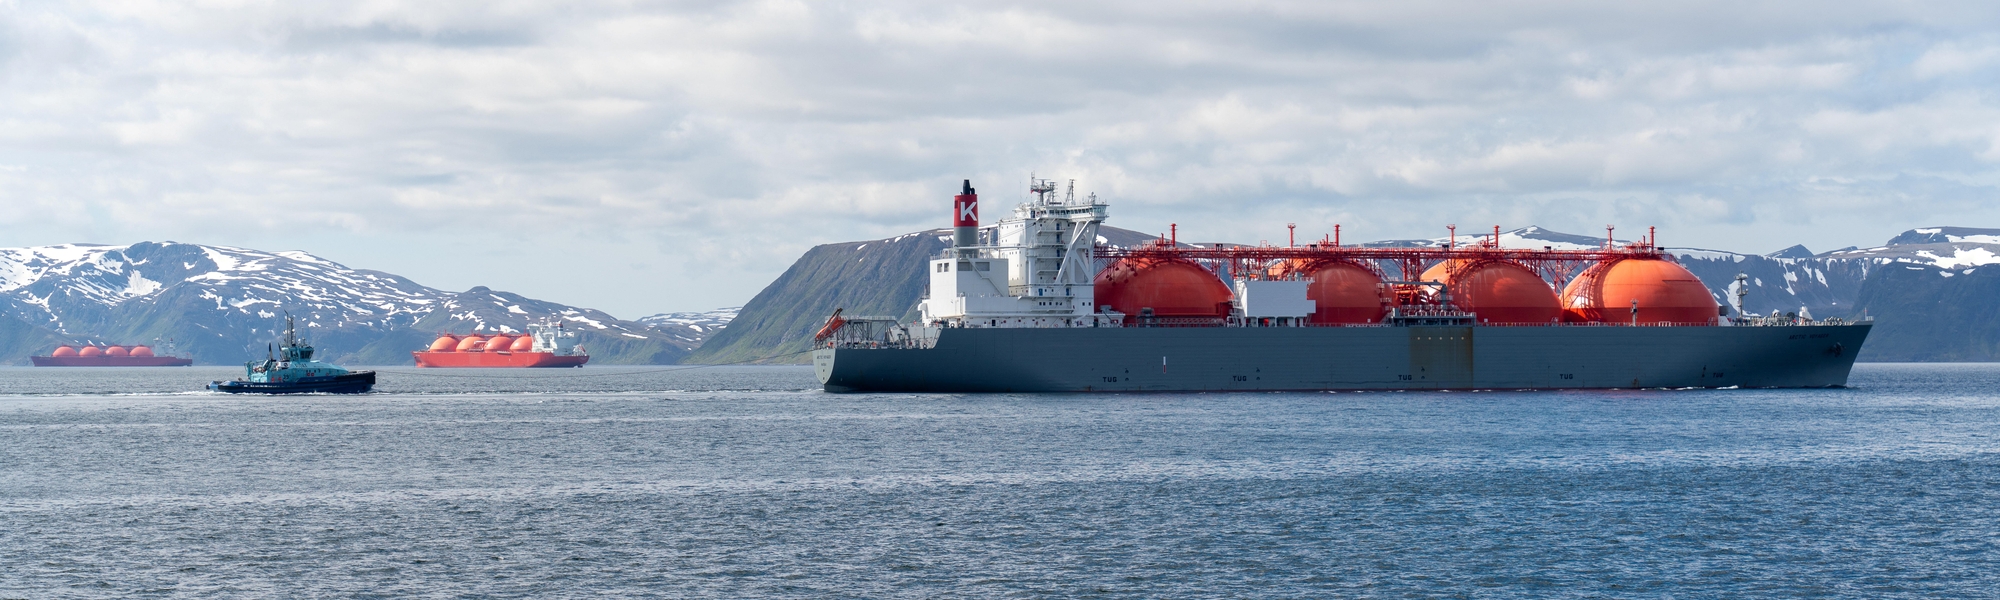 LNG ships ready to transport energy out to Europe